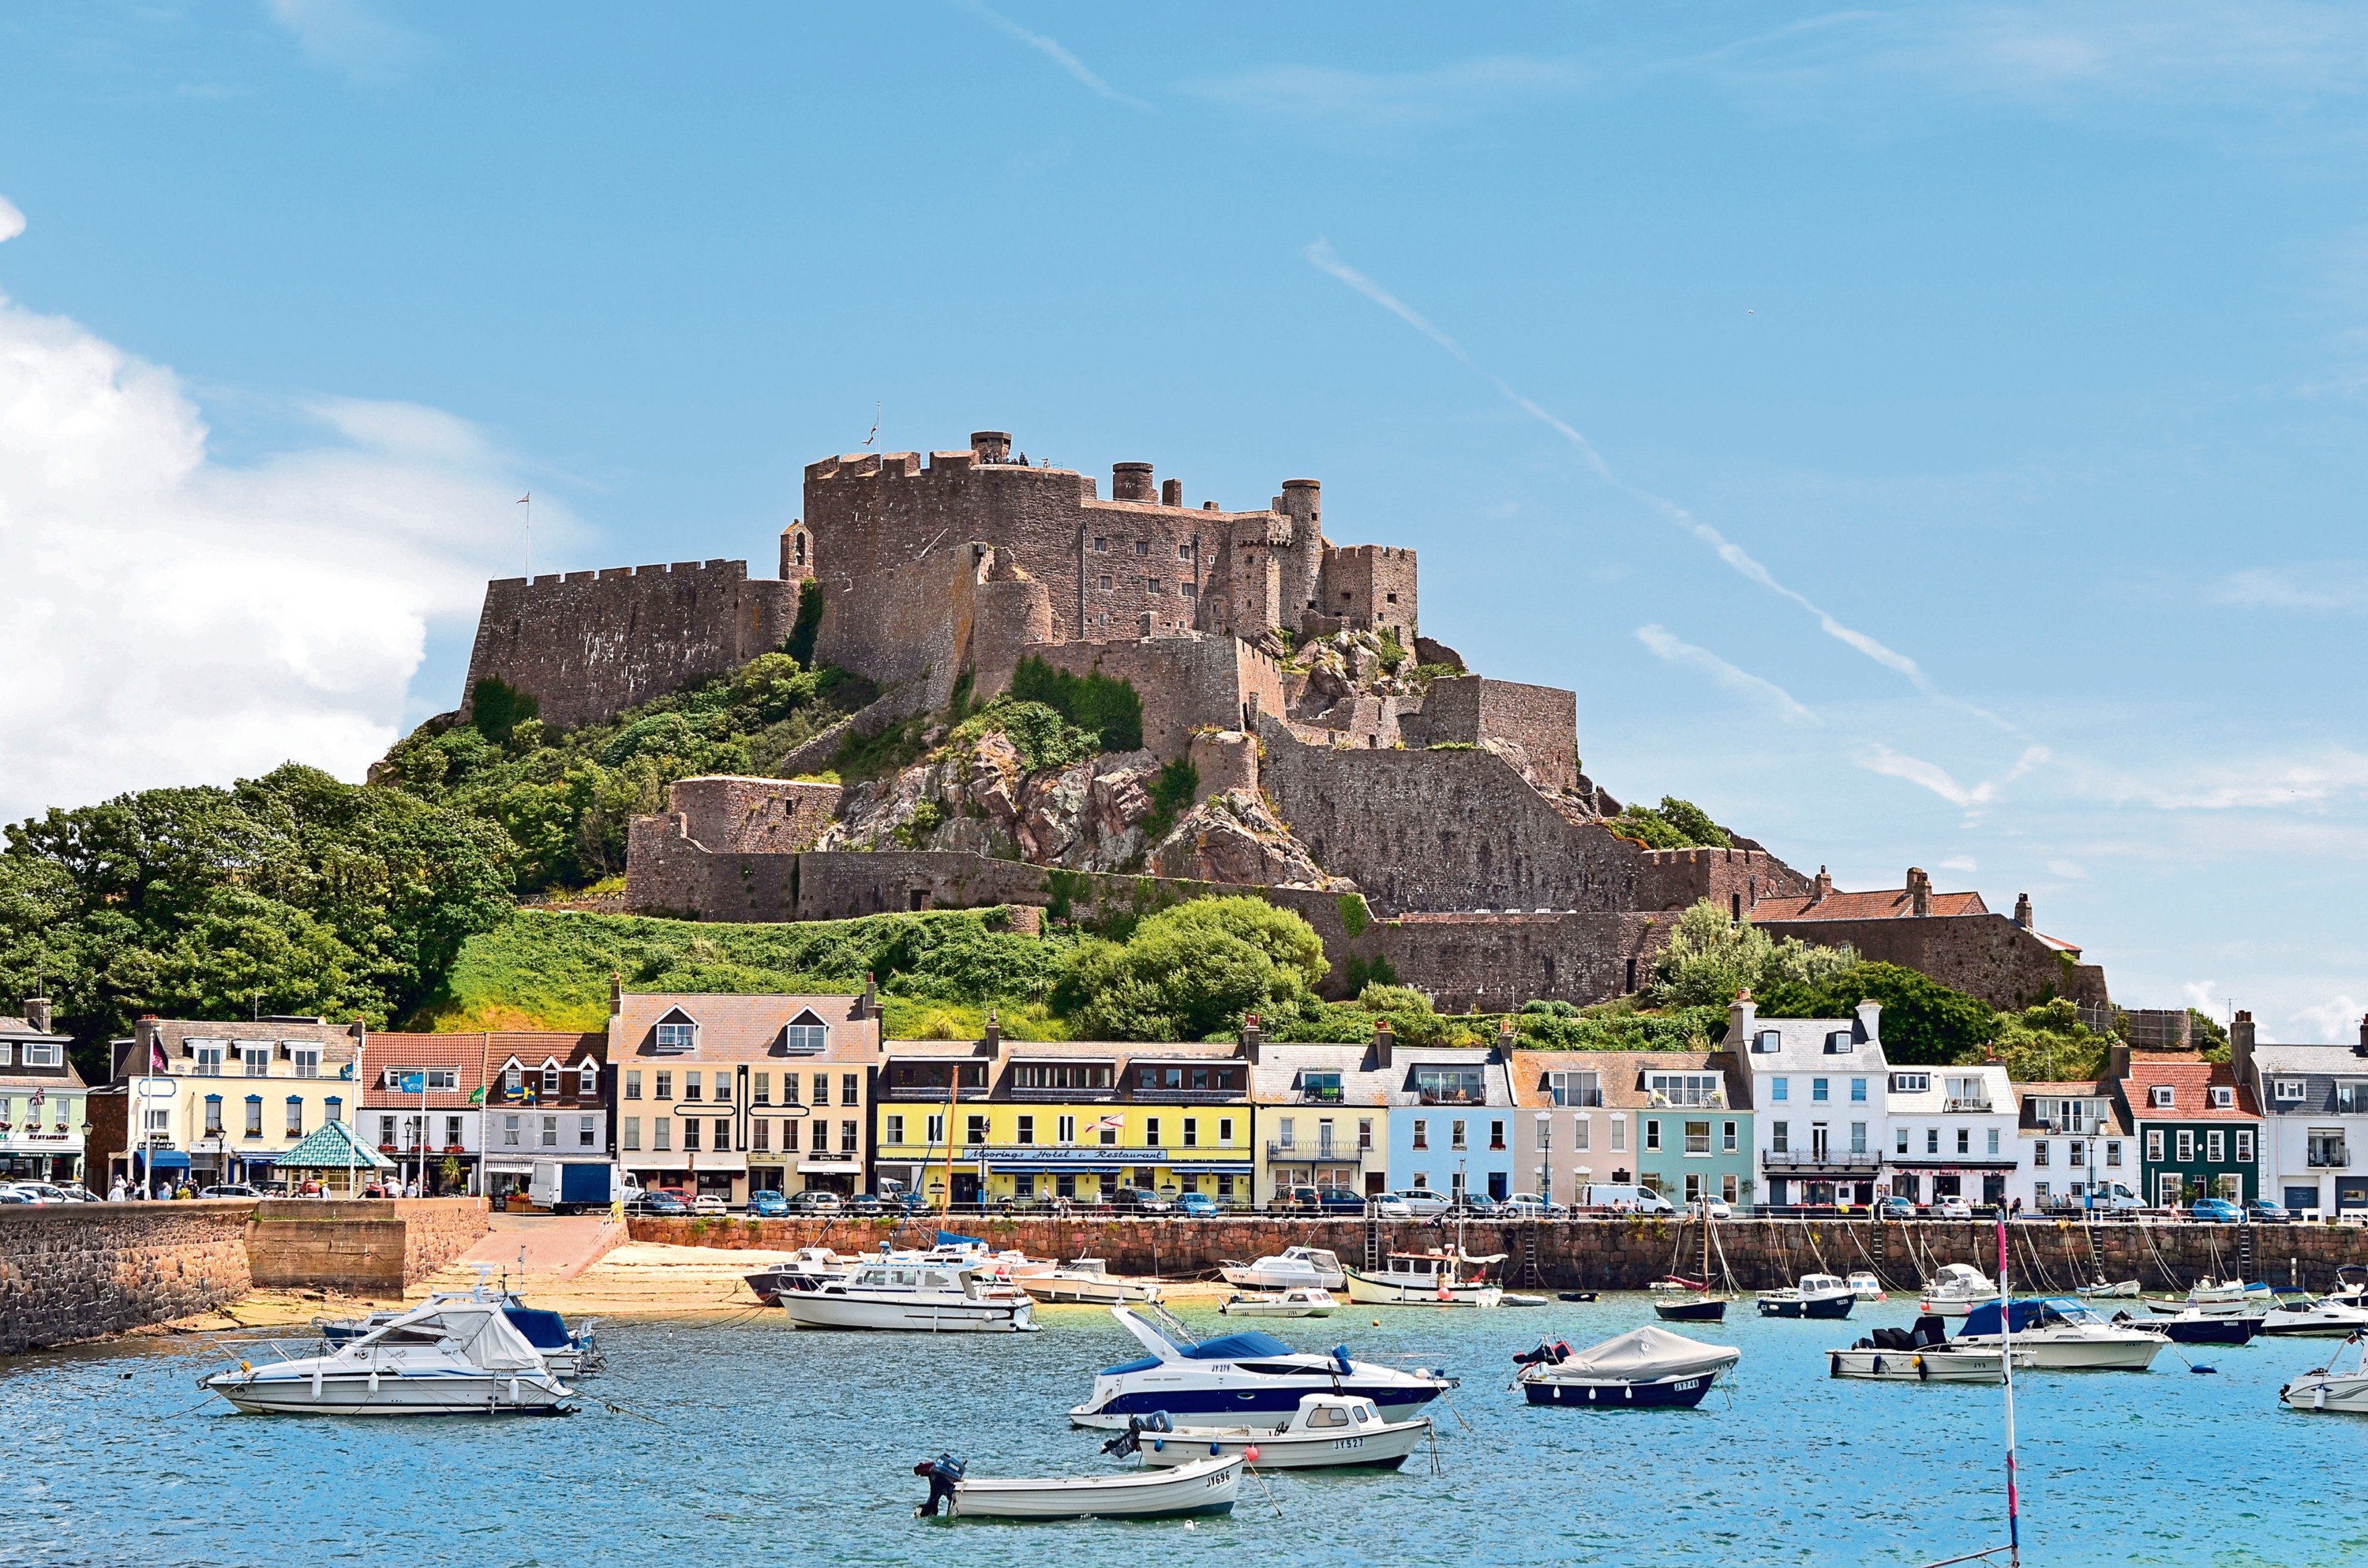 The magnificent Mont Orgueil Castle towers over Gorey Bay on Jersey